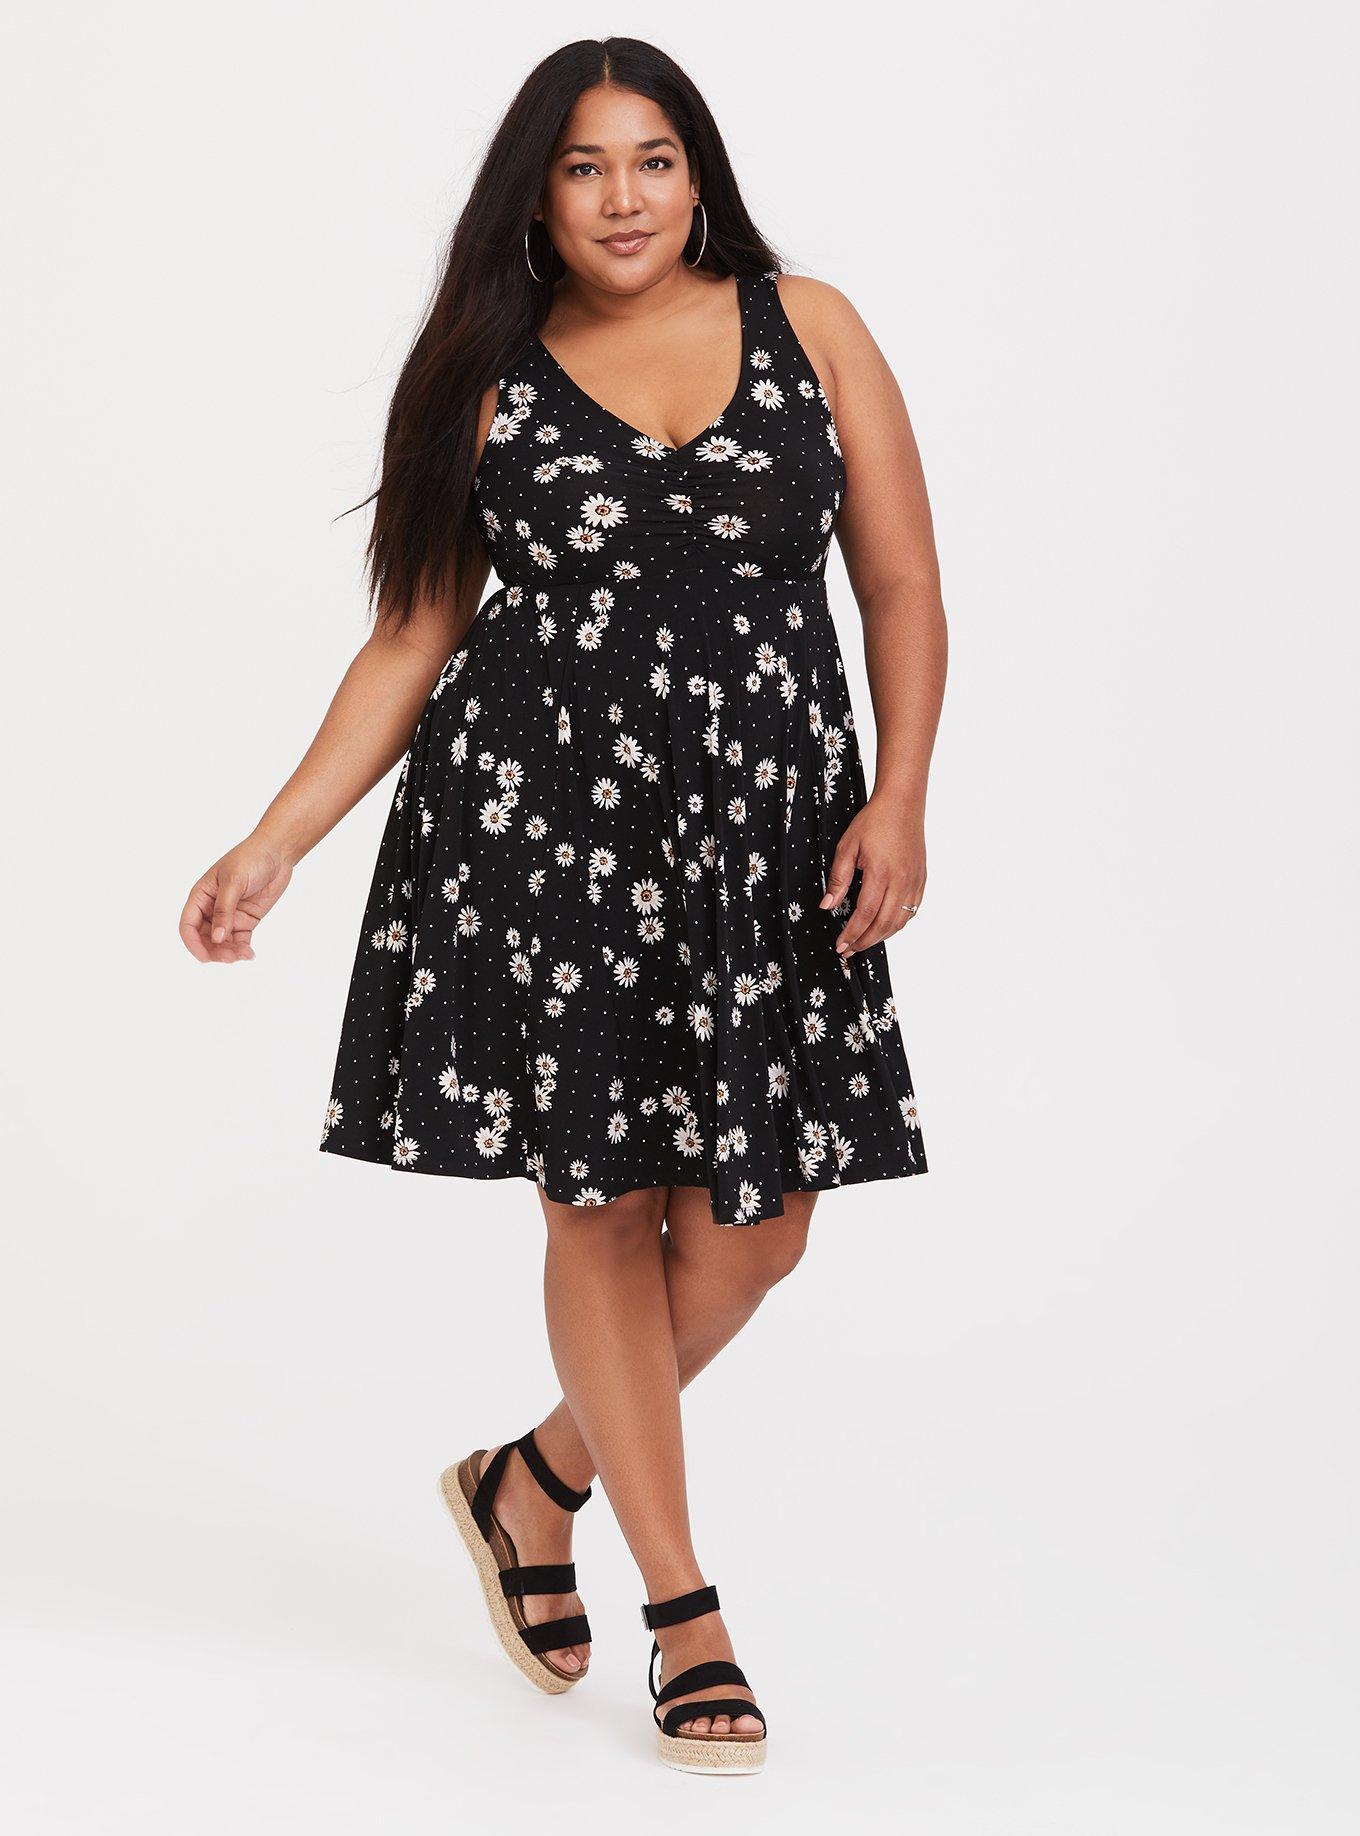 The Limited Short Sleeve Floral Pattern 90s Style Skater Dress